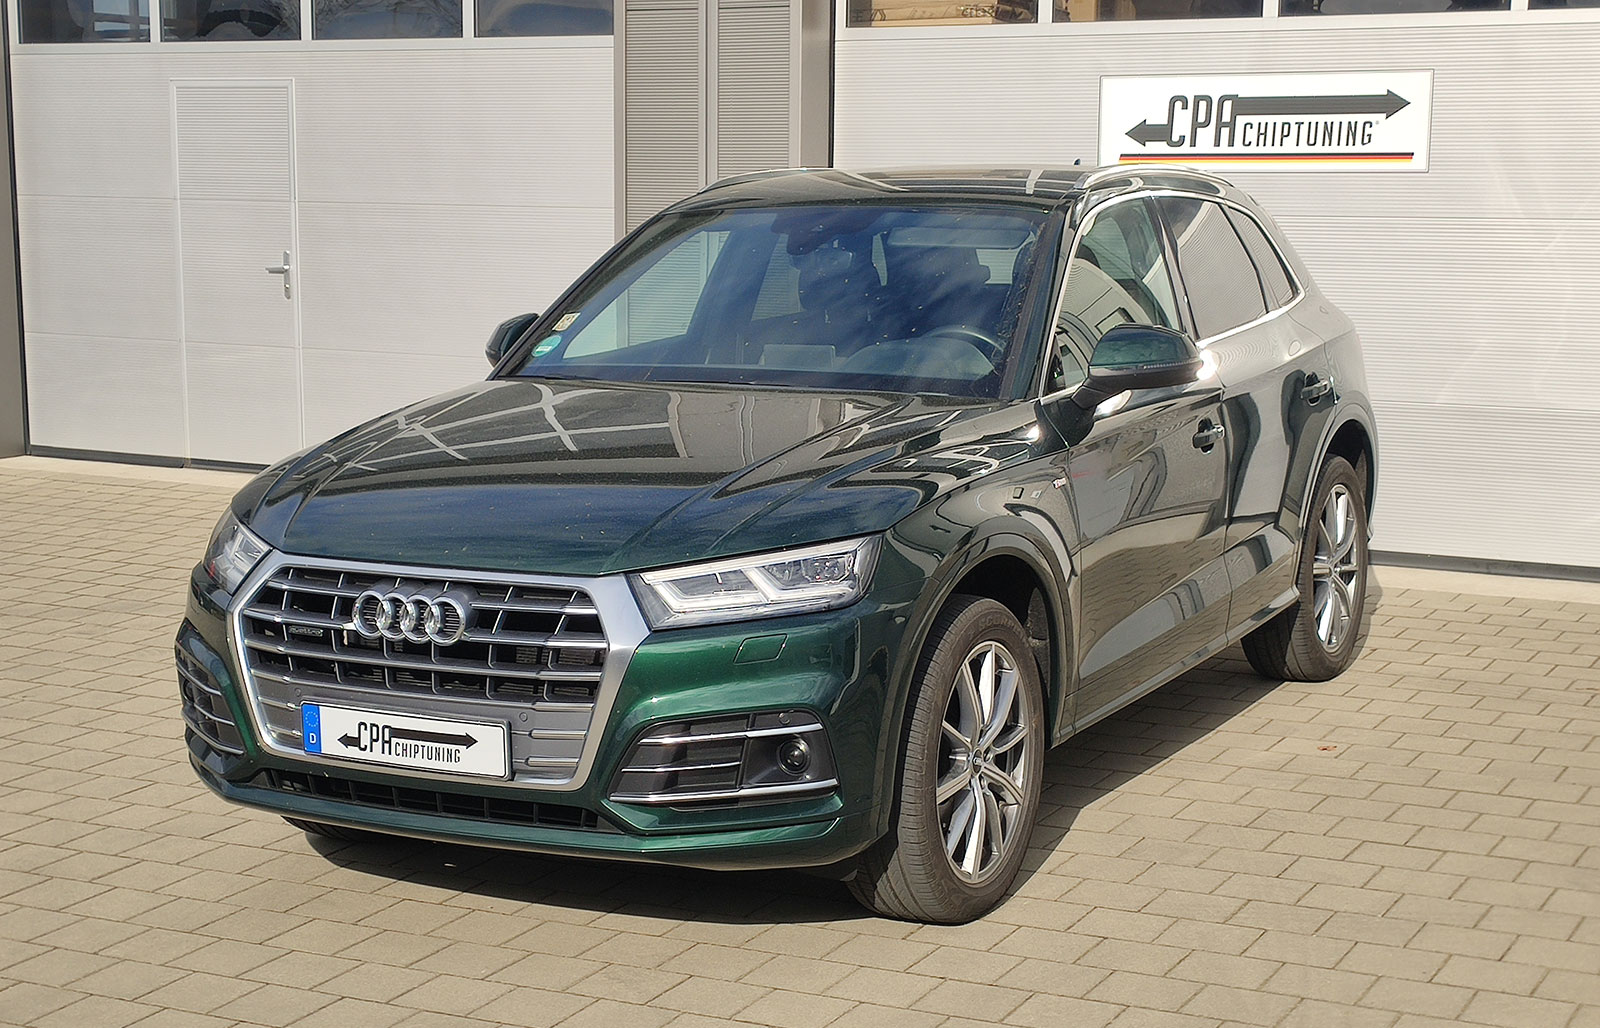 Individual software development for the Audi Q5